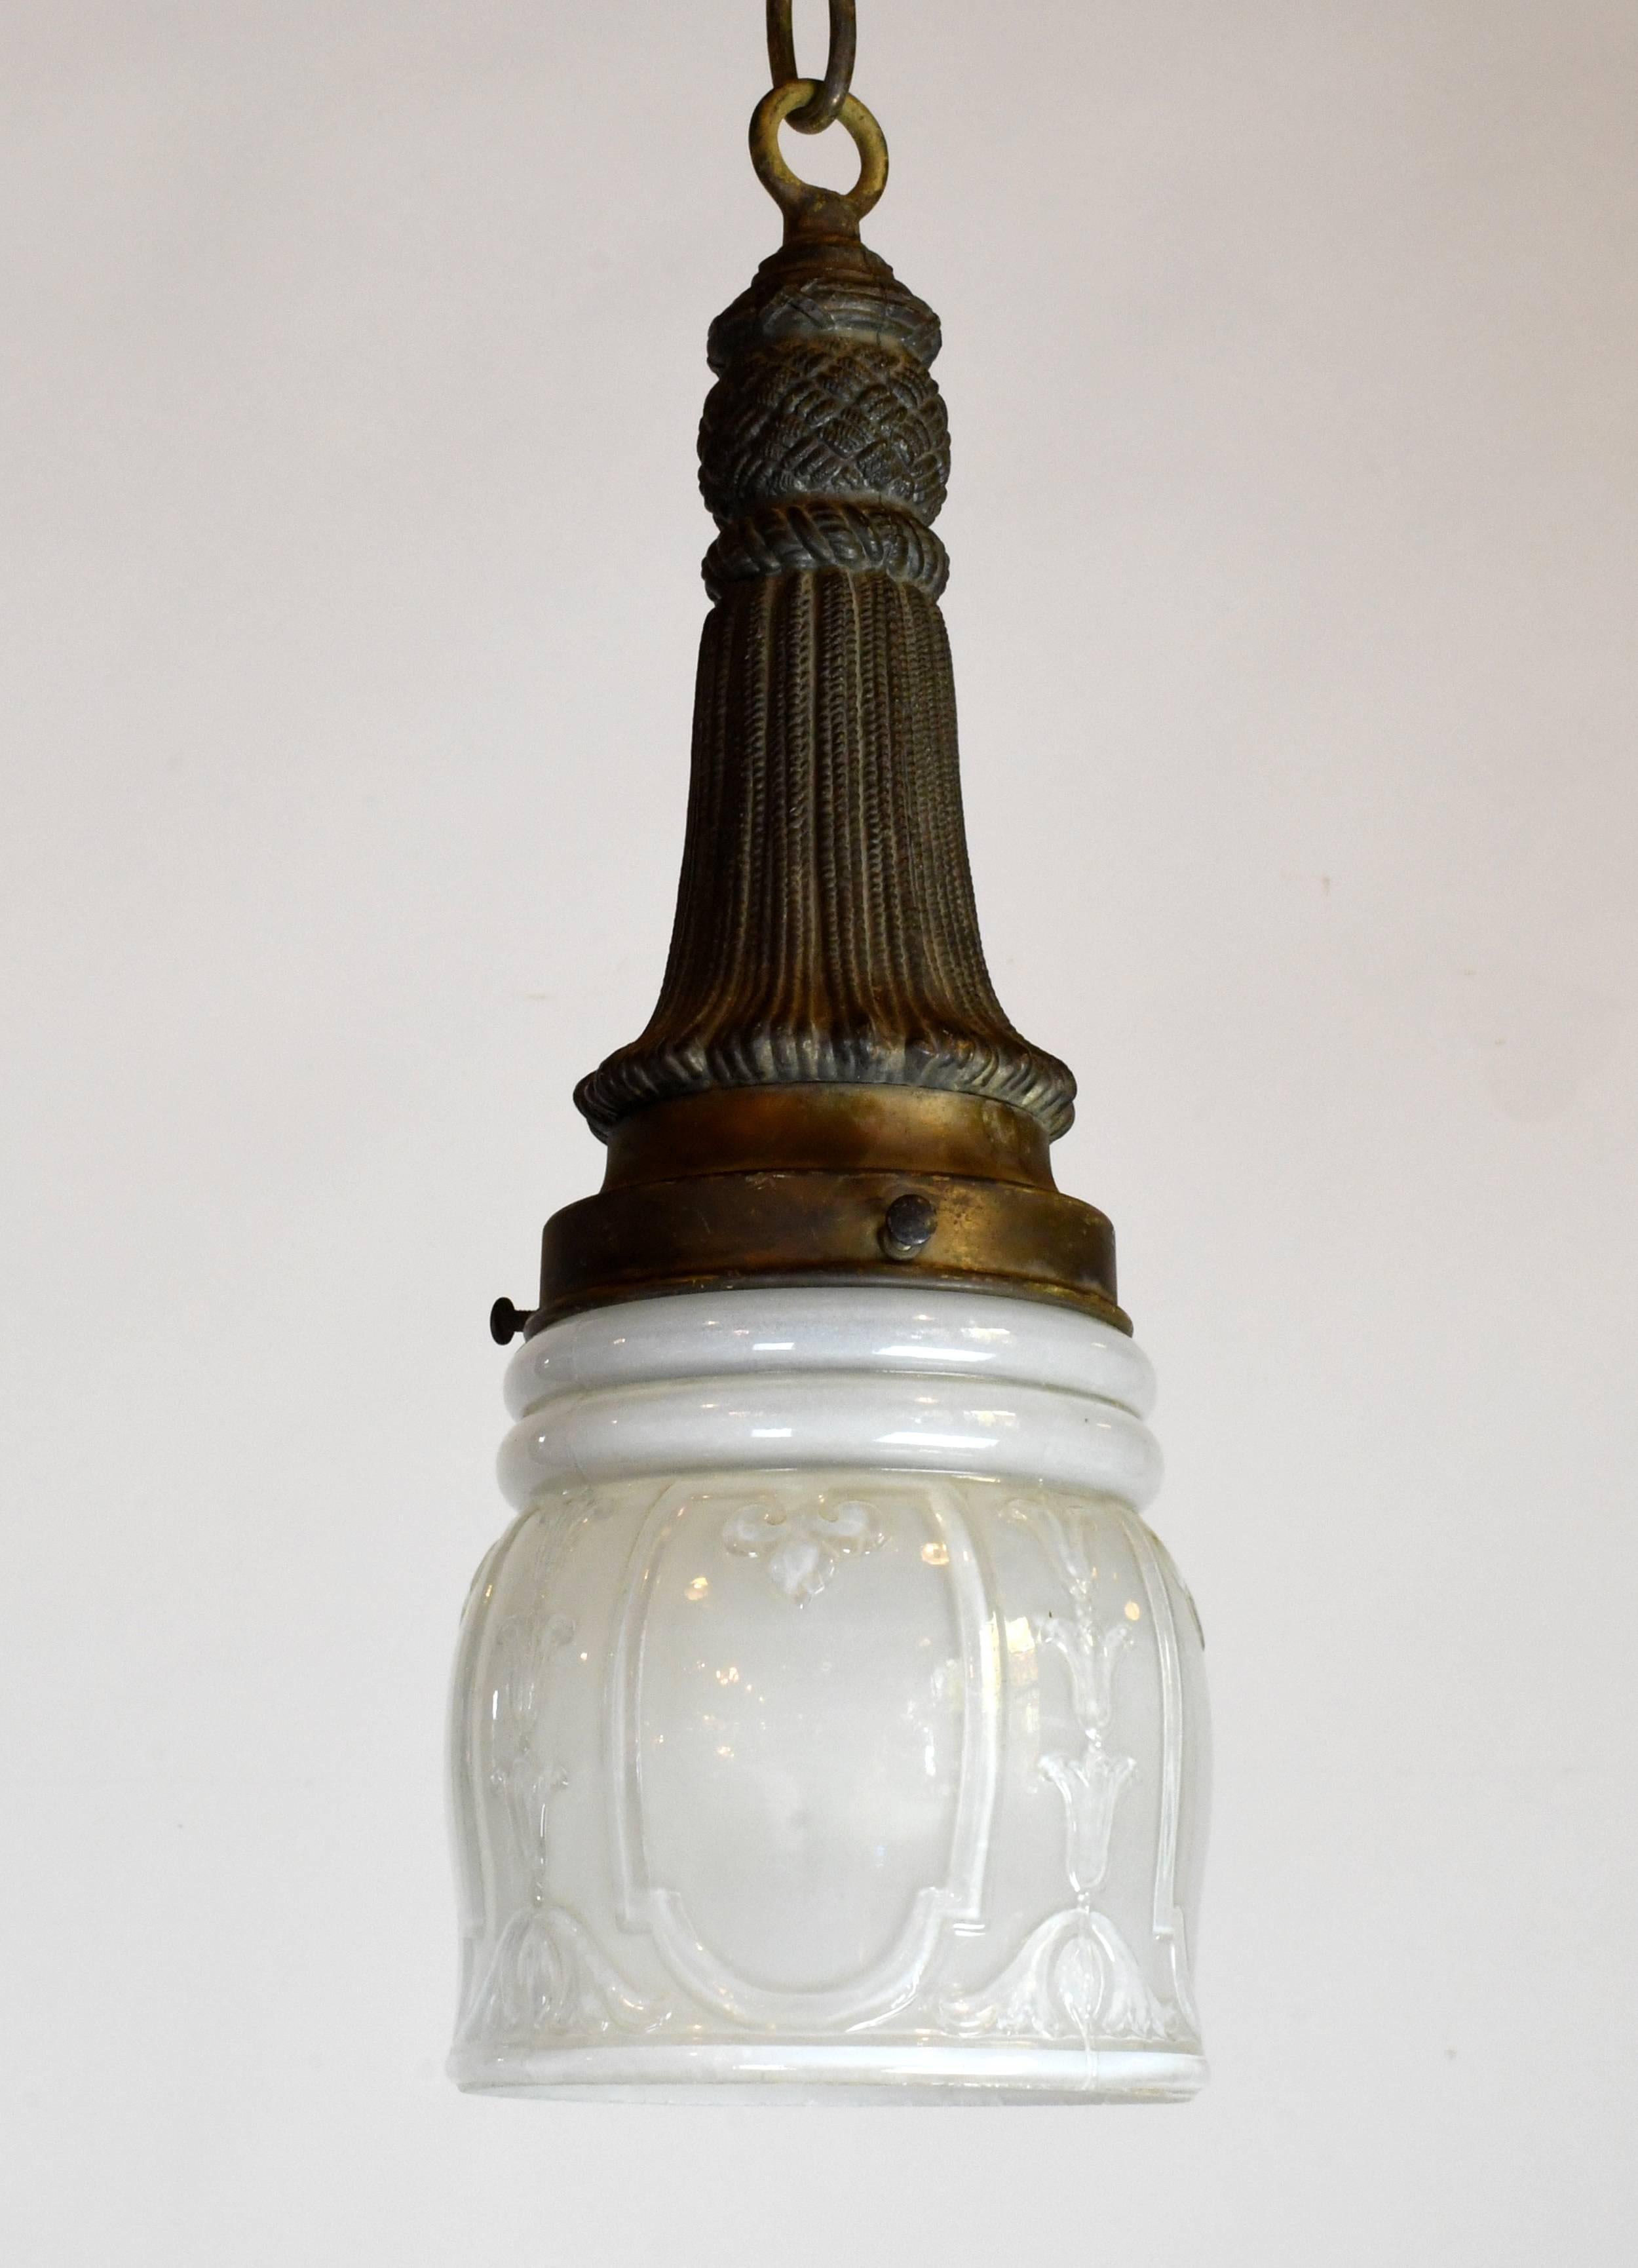 The glass shade of this pendant is decorated with floral patterns, while tassel embellishments and crosshatch patterns weave throughout the fixture itself.

circa 1920
Condition: Excellent
Finish: Original
Country of origin: USA
1 medium socket

We